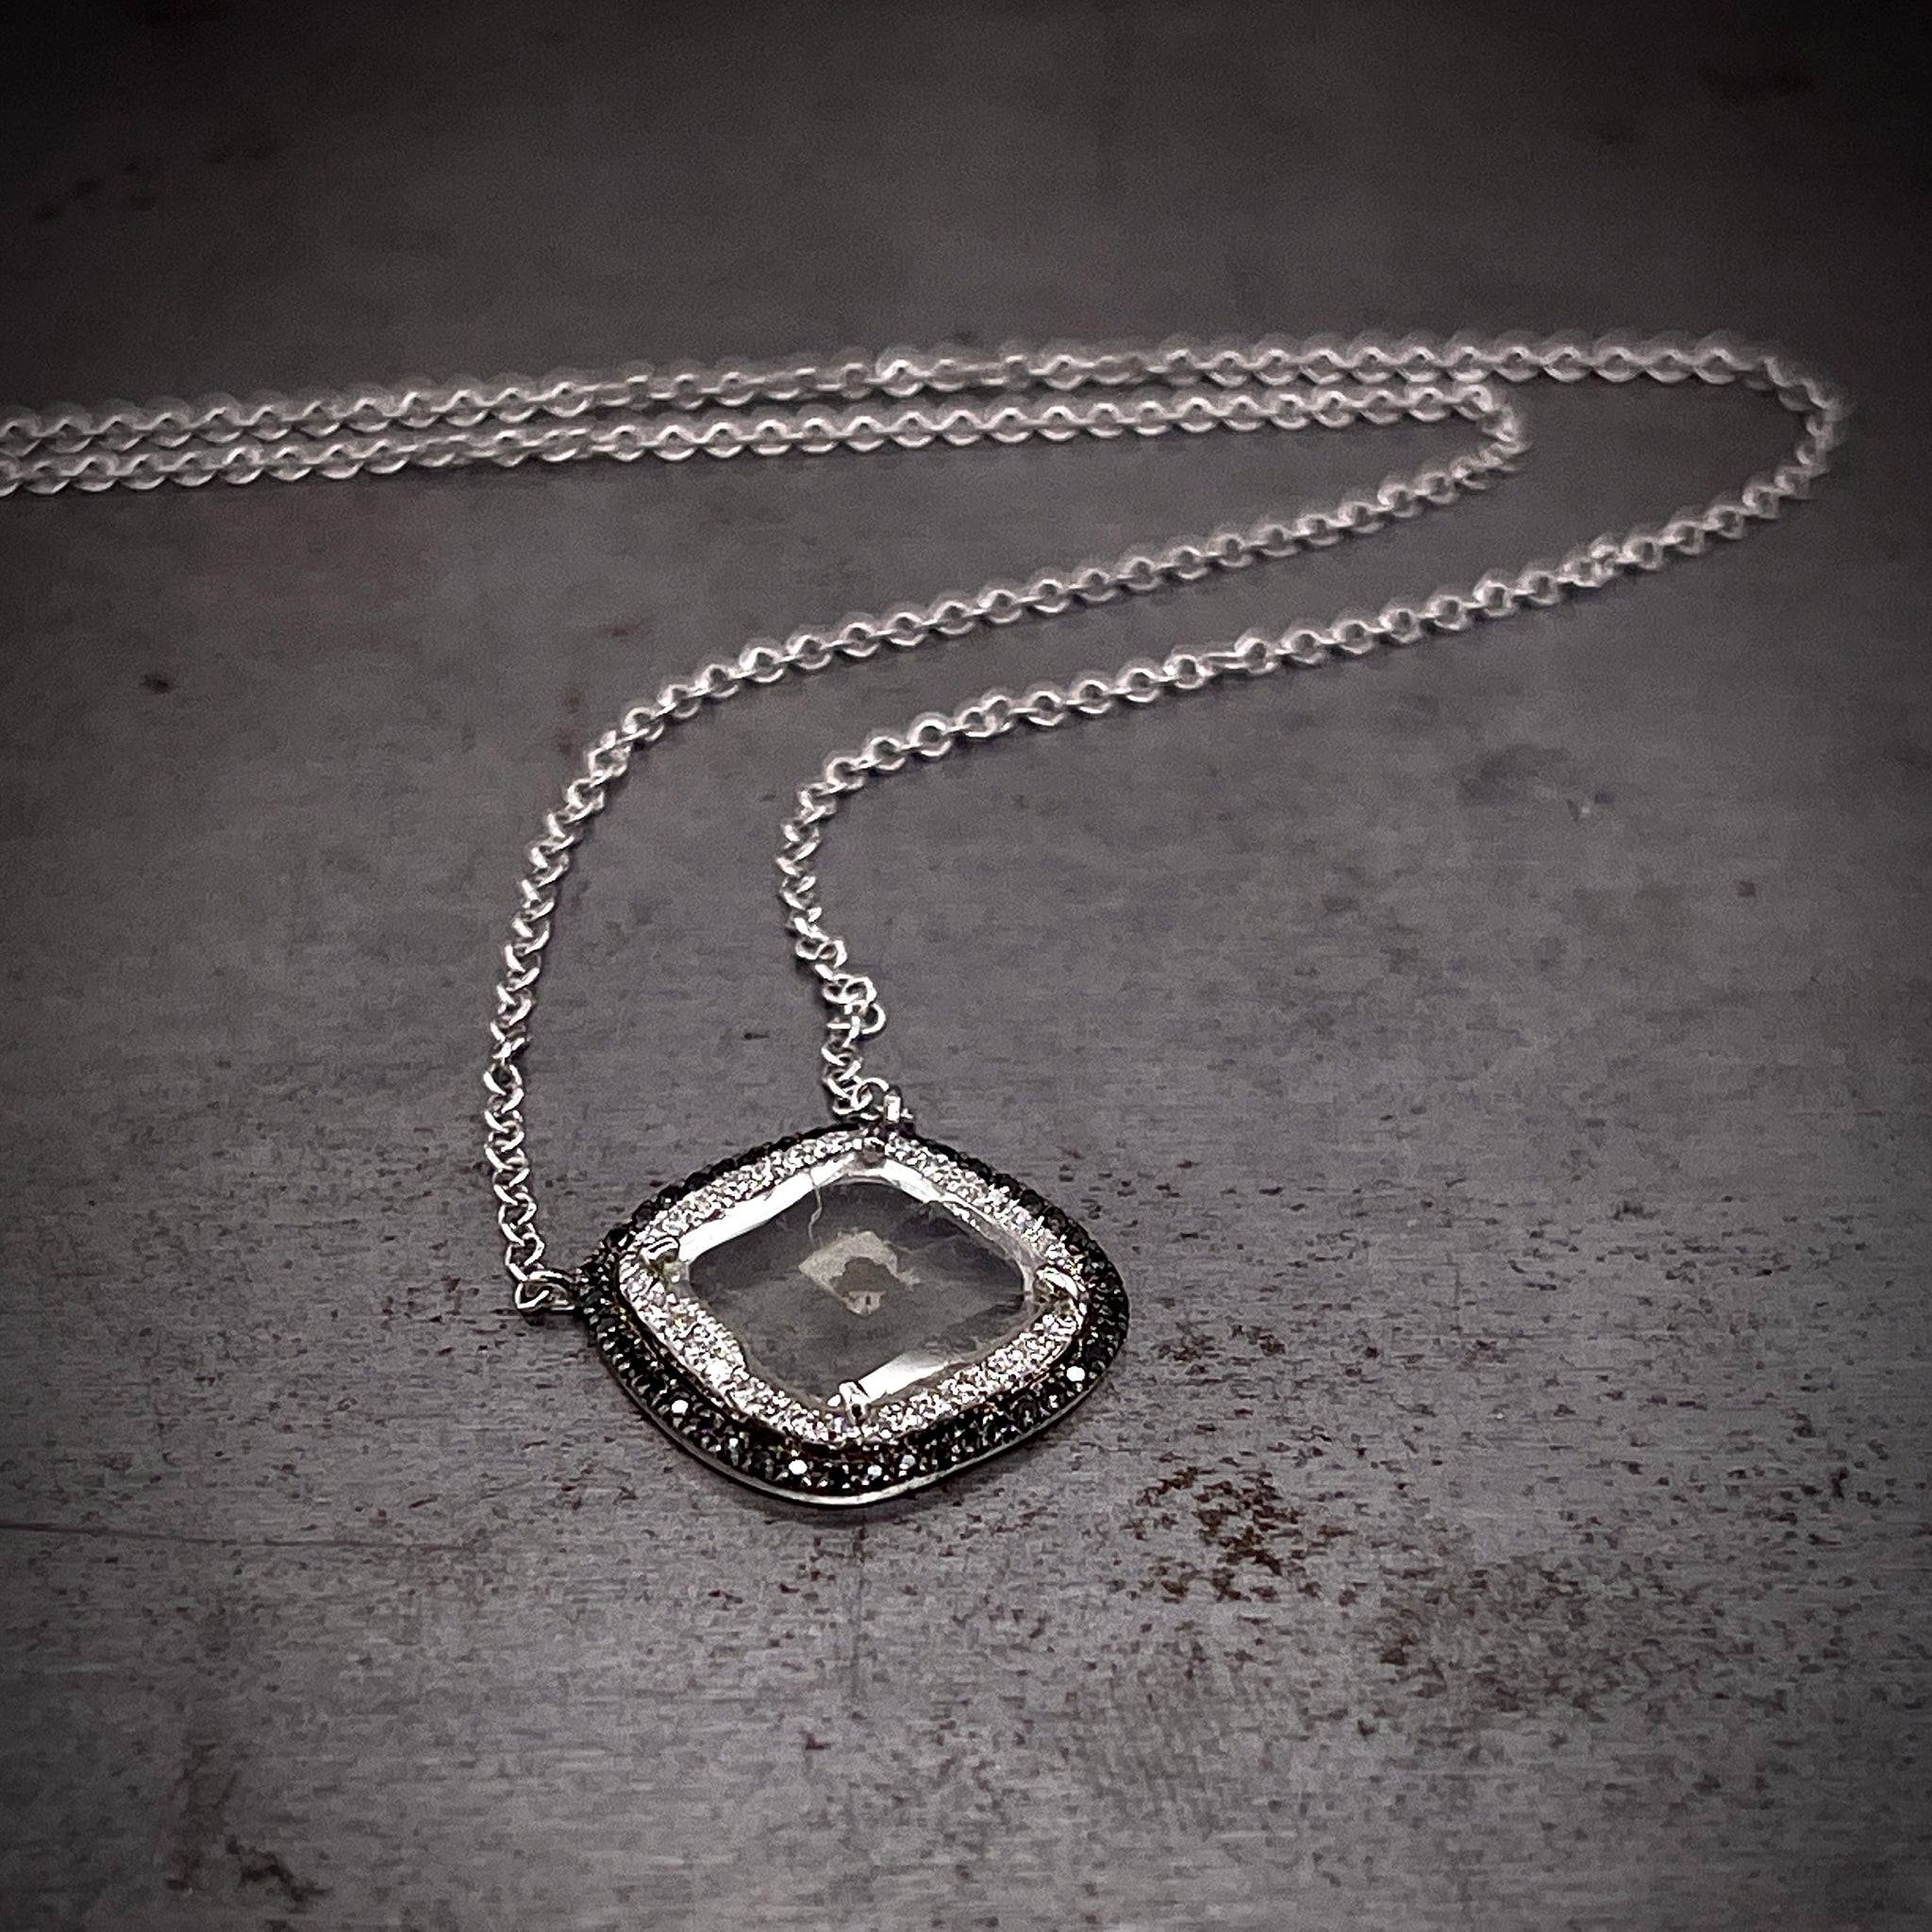 Full view of diamond slice and black diamond necklace laying down with its curb chain snaking through the image.